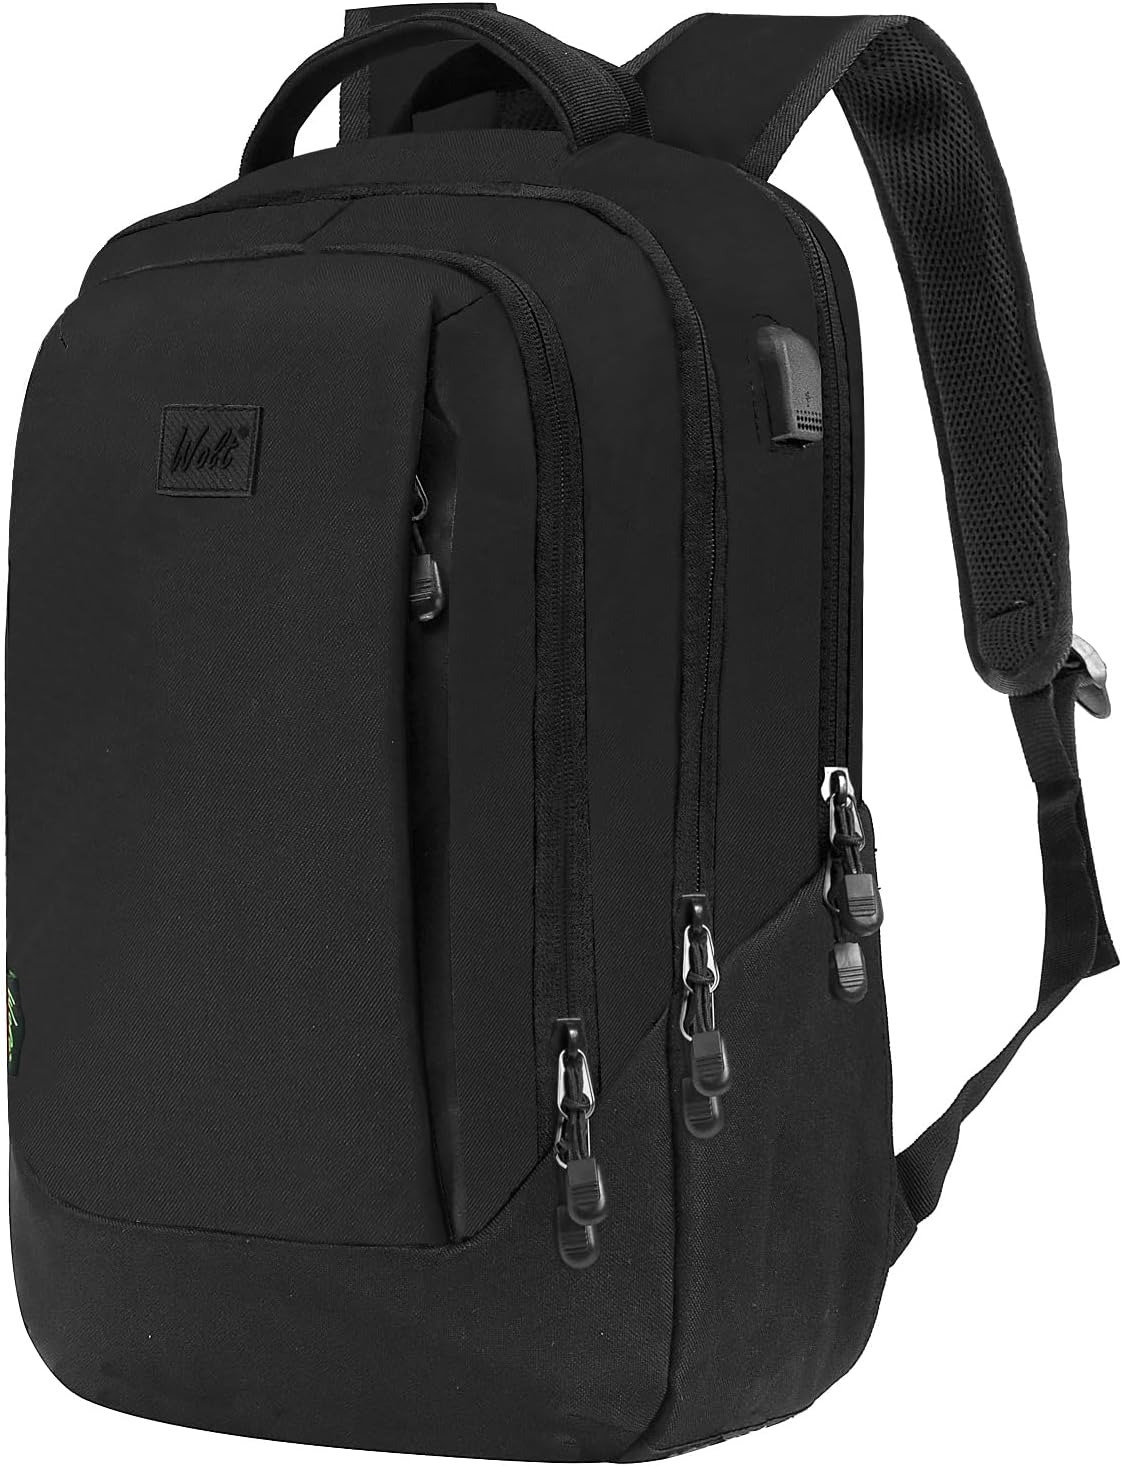 | Travel Laptop Backpack for Women & Men - Airplane Approved Carry on Business B